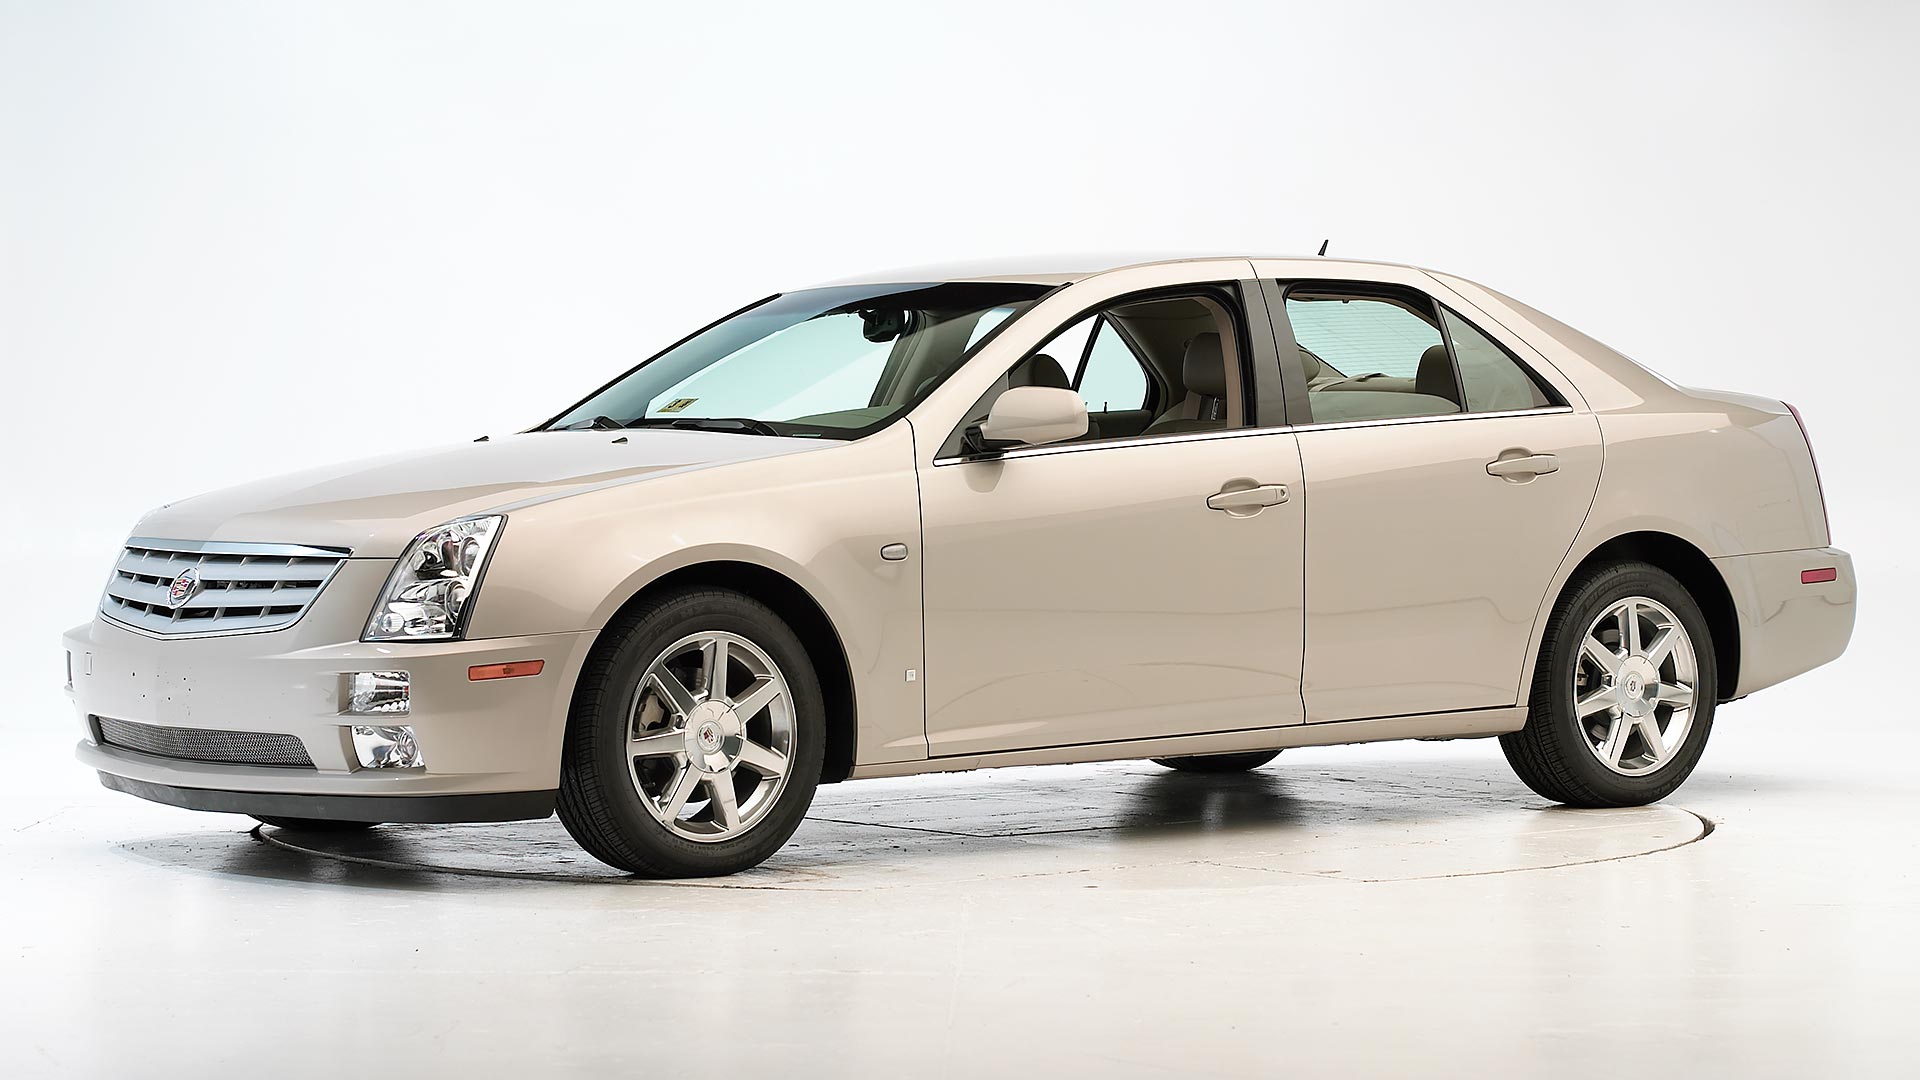 Cadillac STS Specs, Pictures & Engine Review